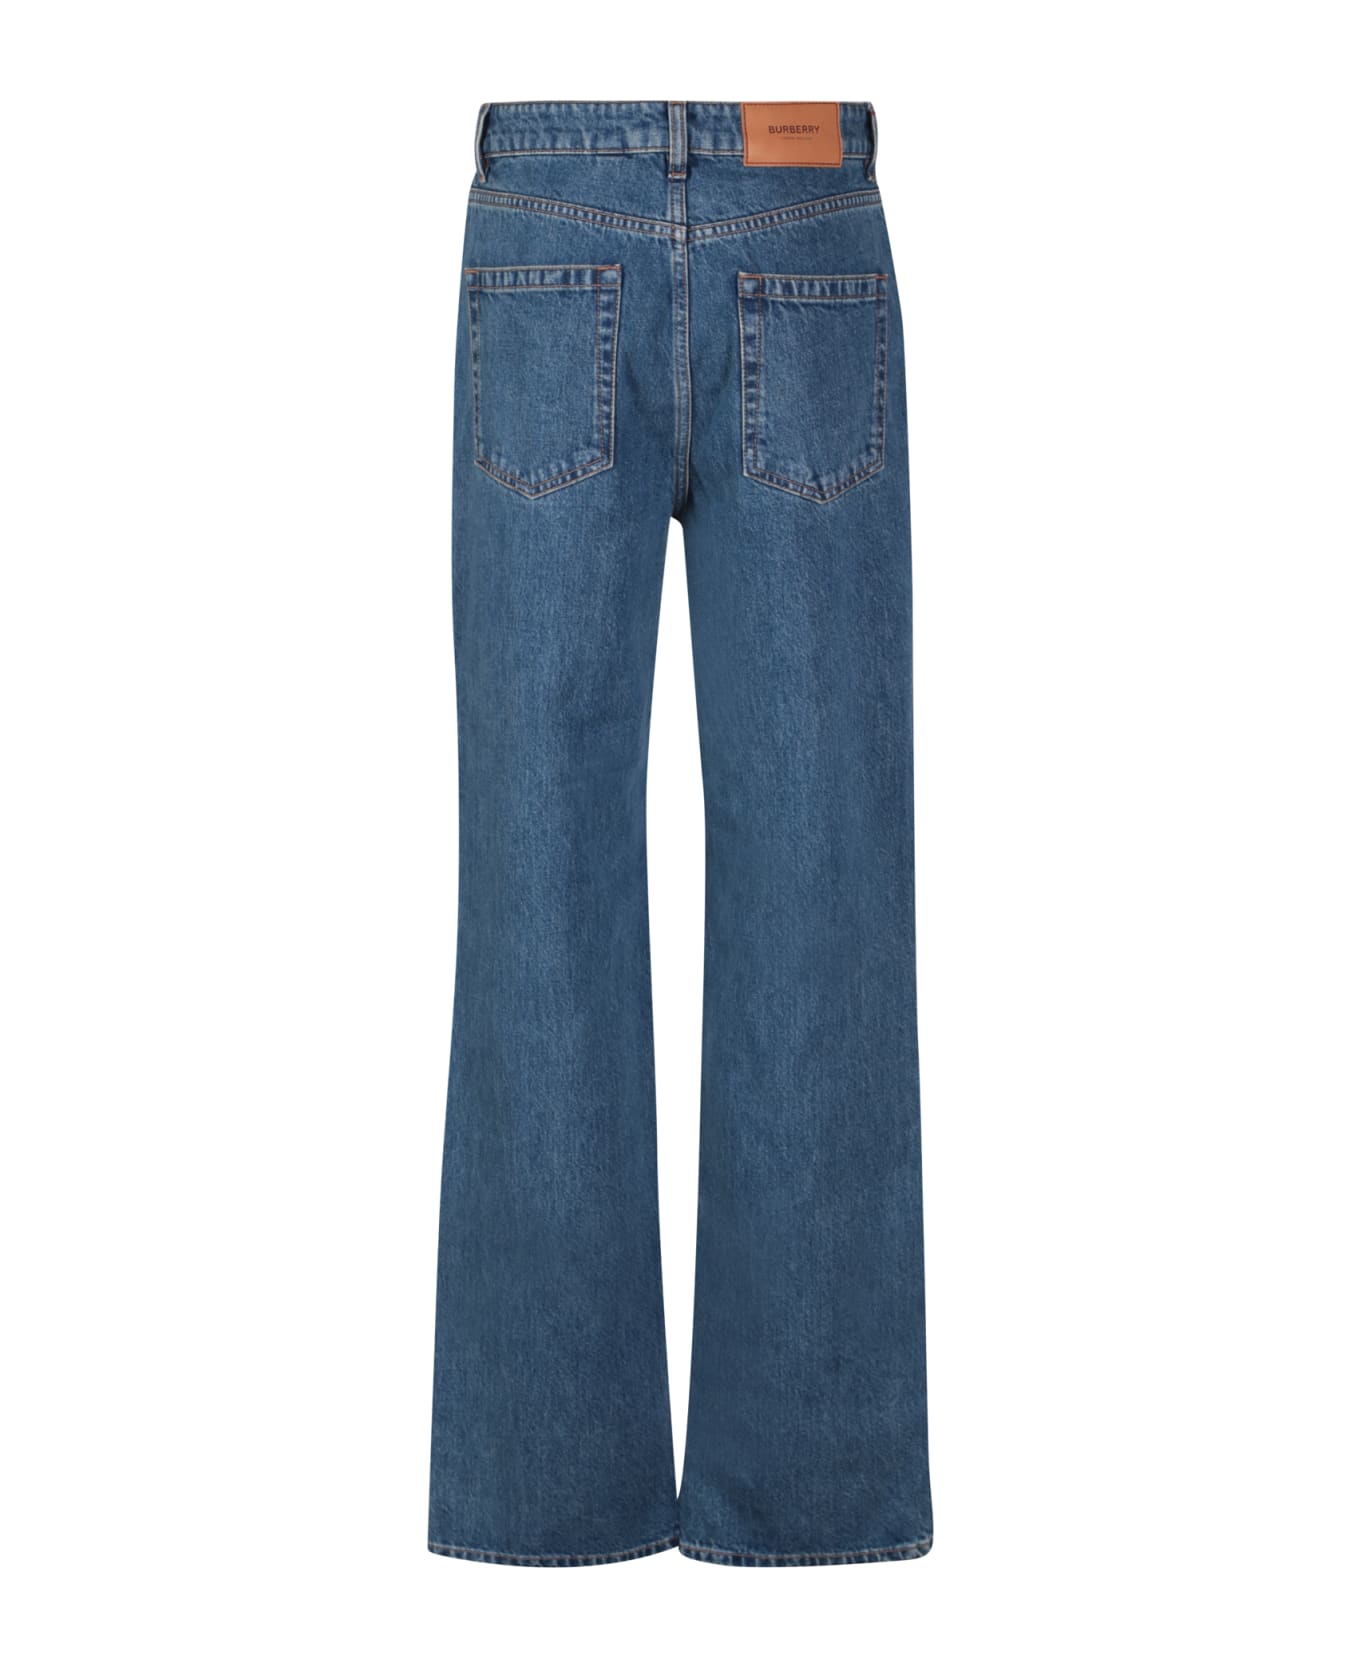 Burberry Straight Cut Jeans - Classic blue